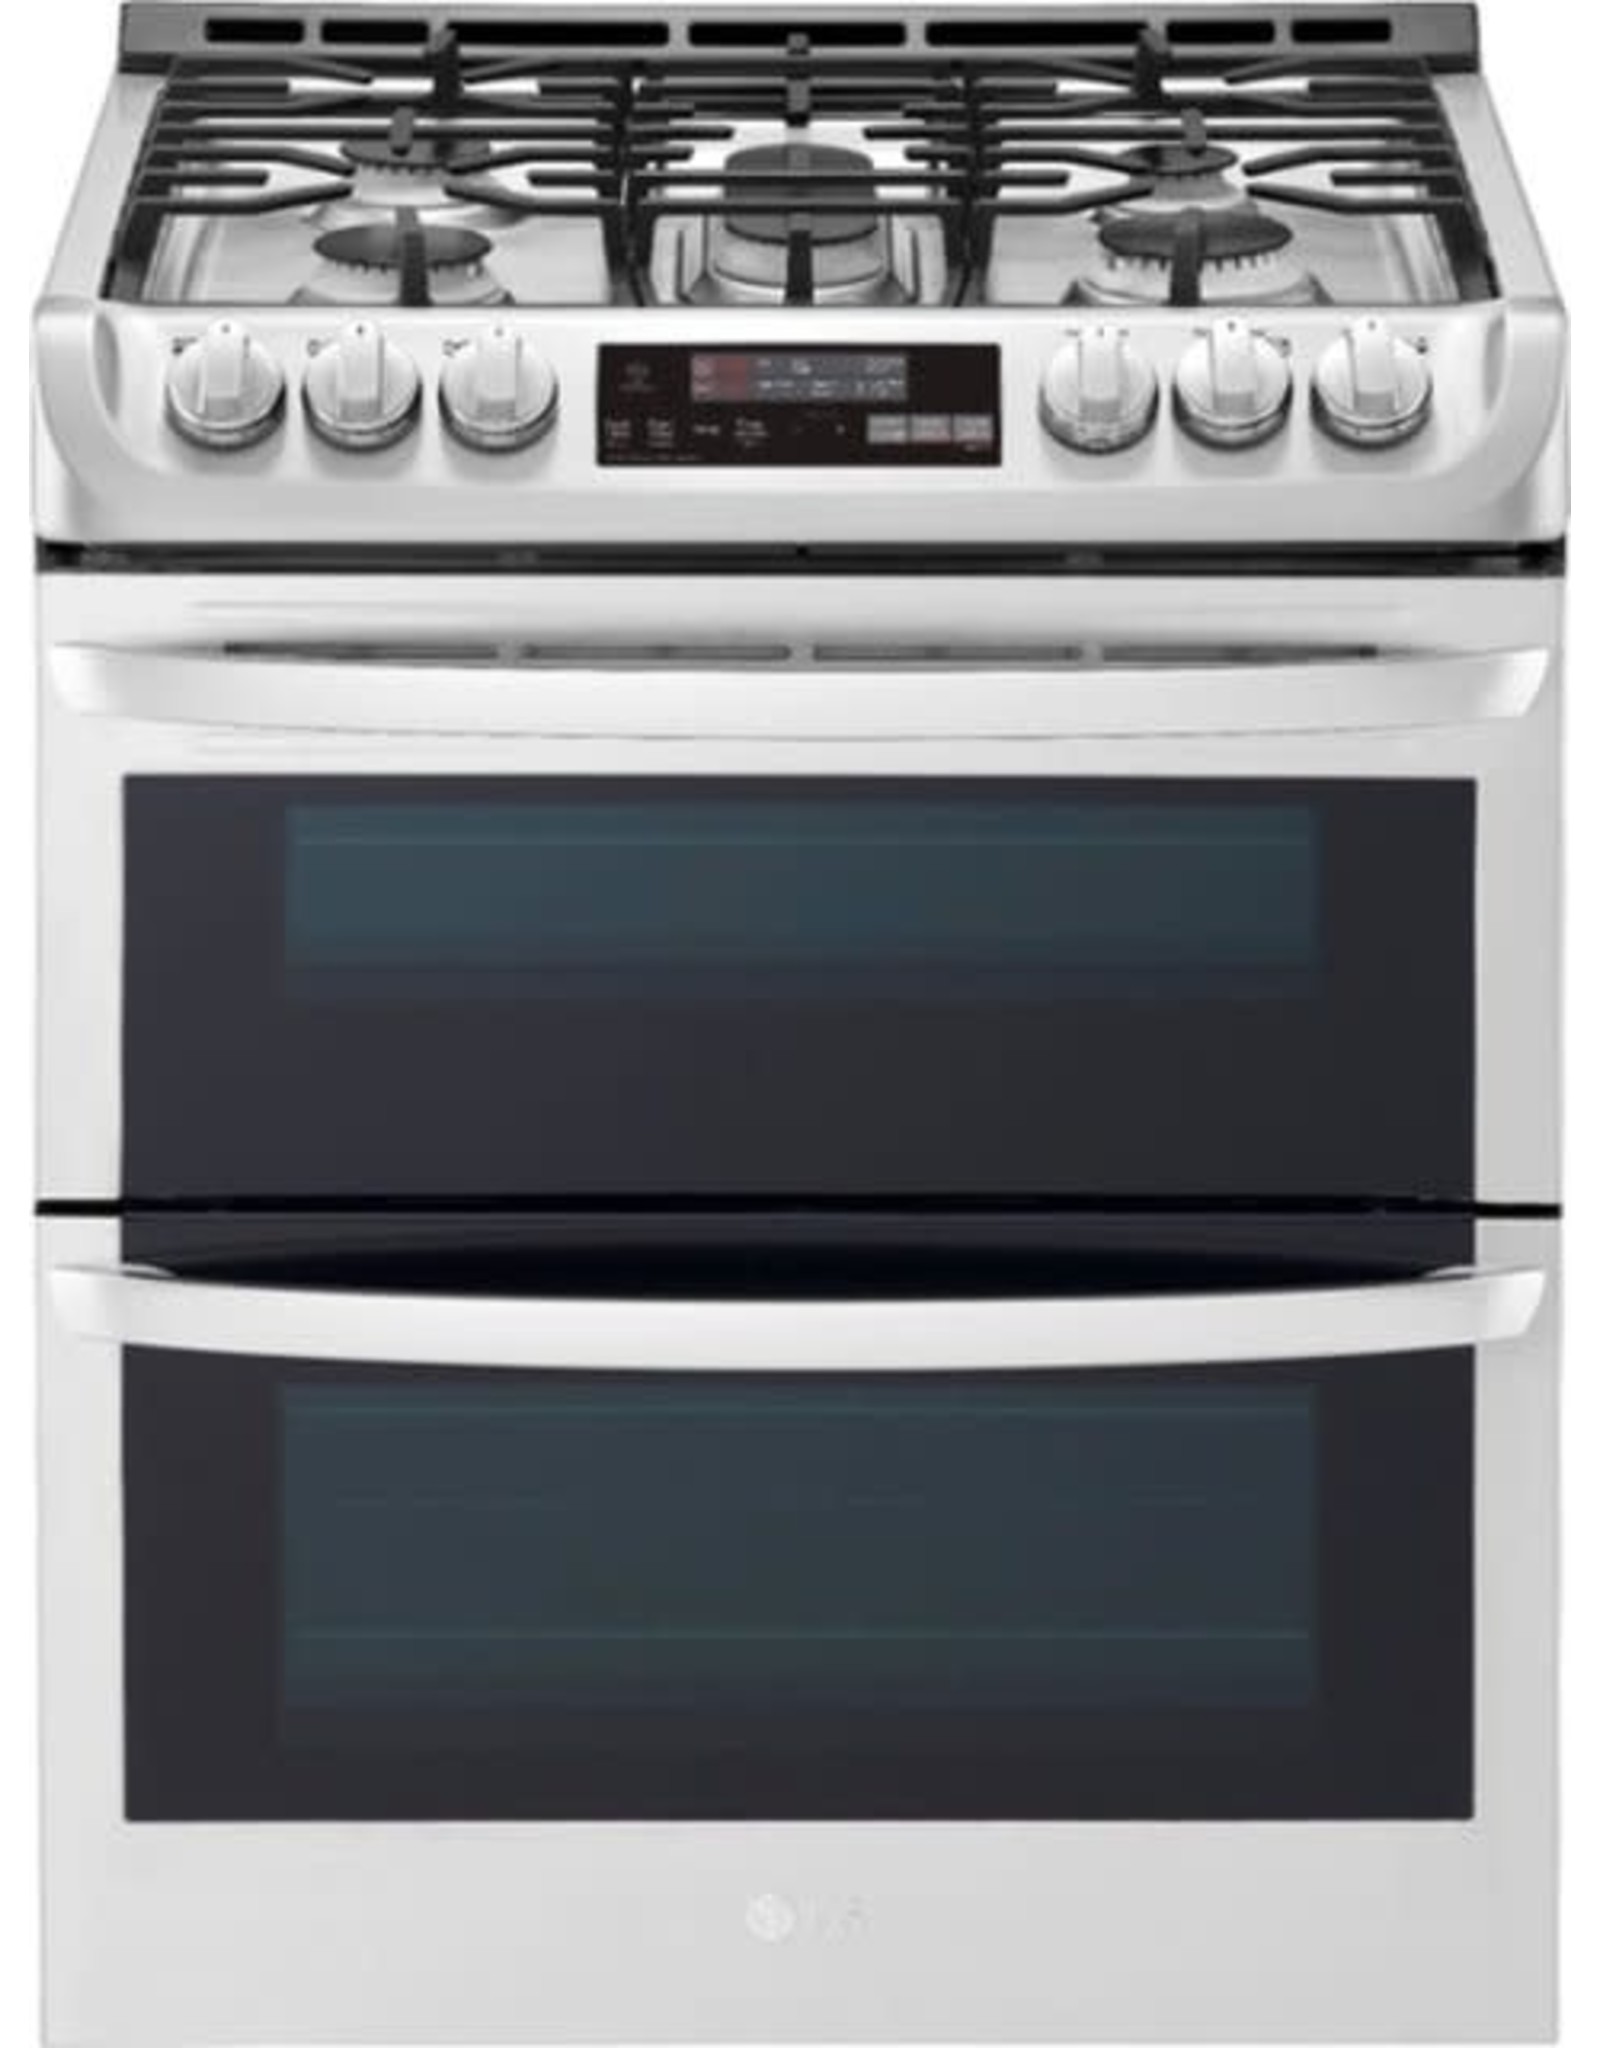 LG Electronics LTG4715ST  6.9 cu. ft. Smart Double Oven Slide In Gas Range with ProBake Convection and Wi-Fi in Stainless Steel